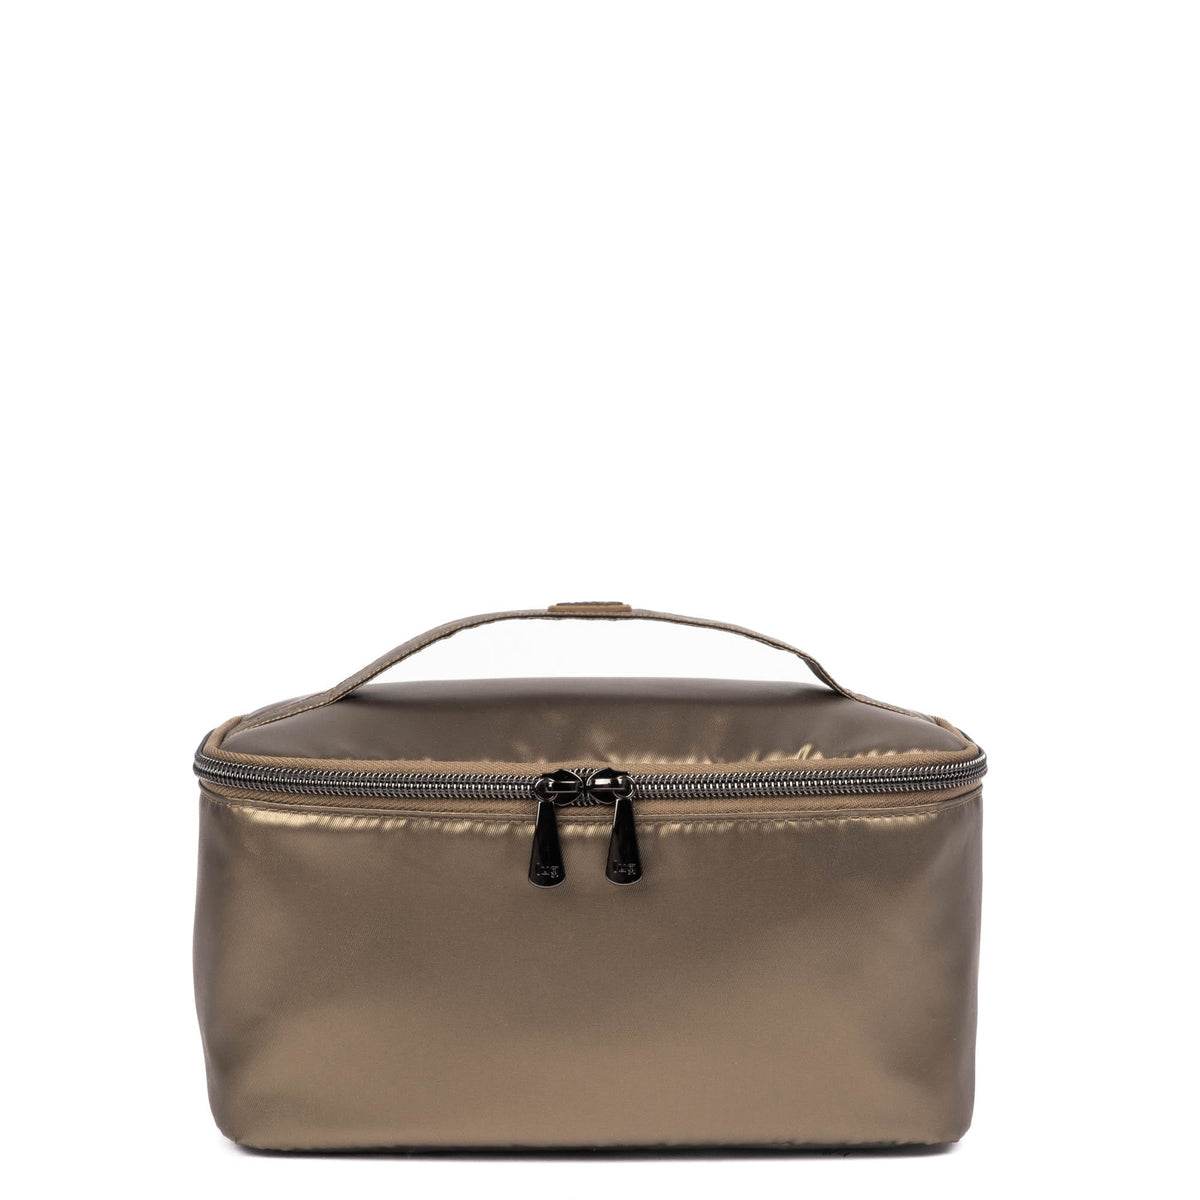 Dolly Short SE Cosmetic Case